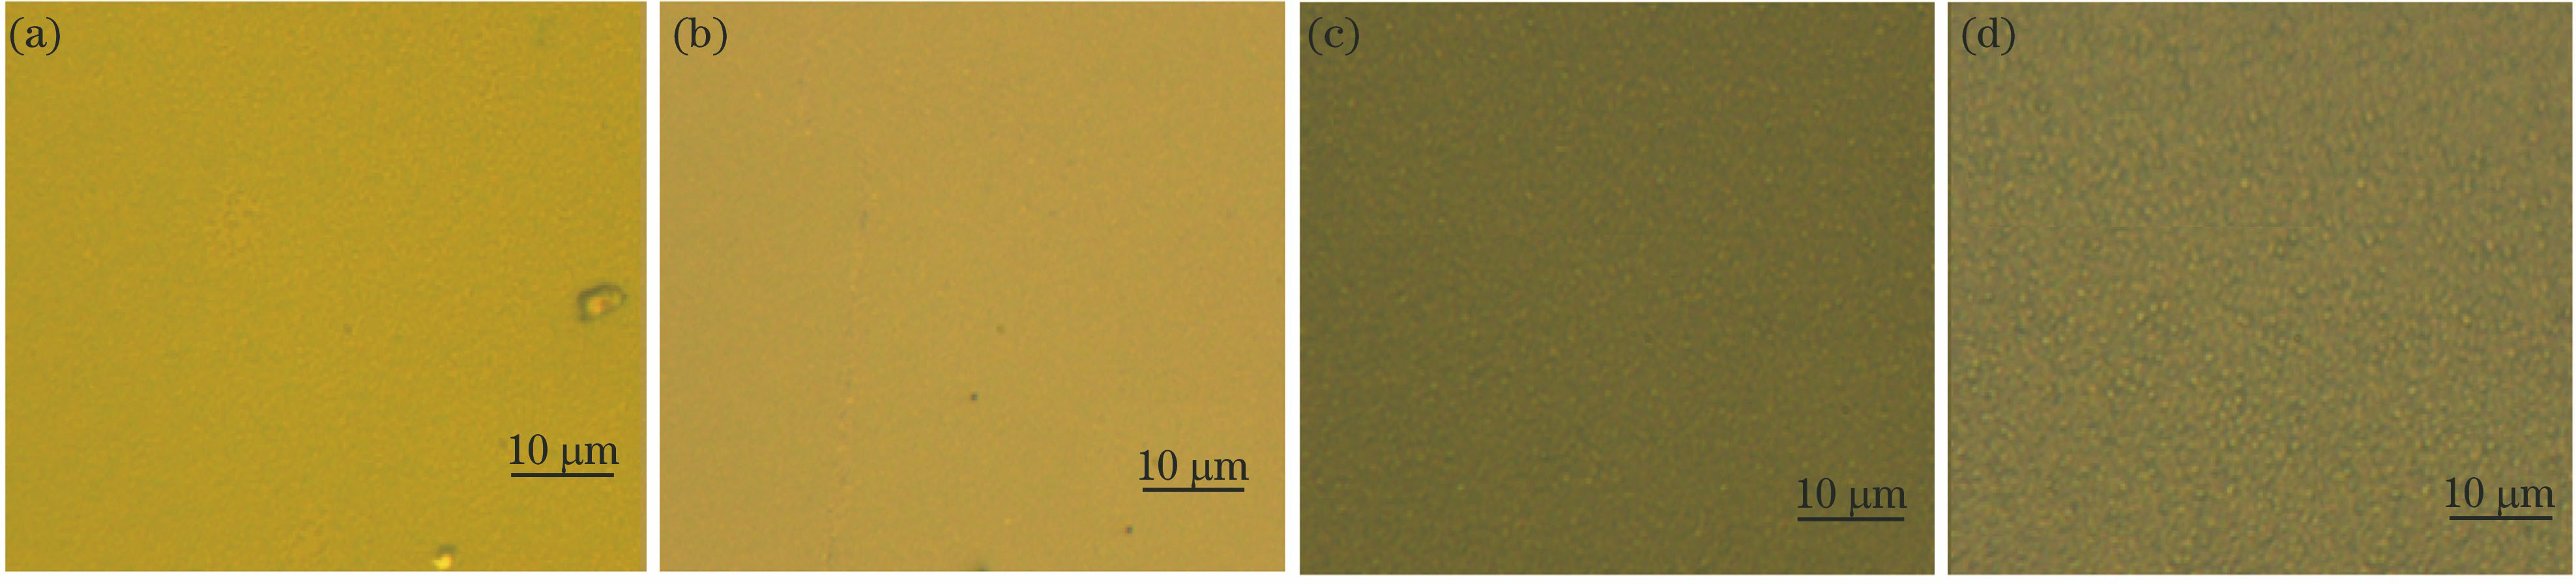 Optical micrographs with the annealing temperature of (a) 500 ℃, (b) 550 ℃, (c) 570 ℃, (d) 600 ℃ while the gold film thickness is 10 nm